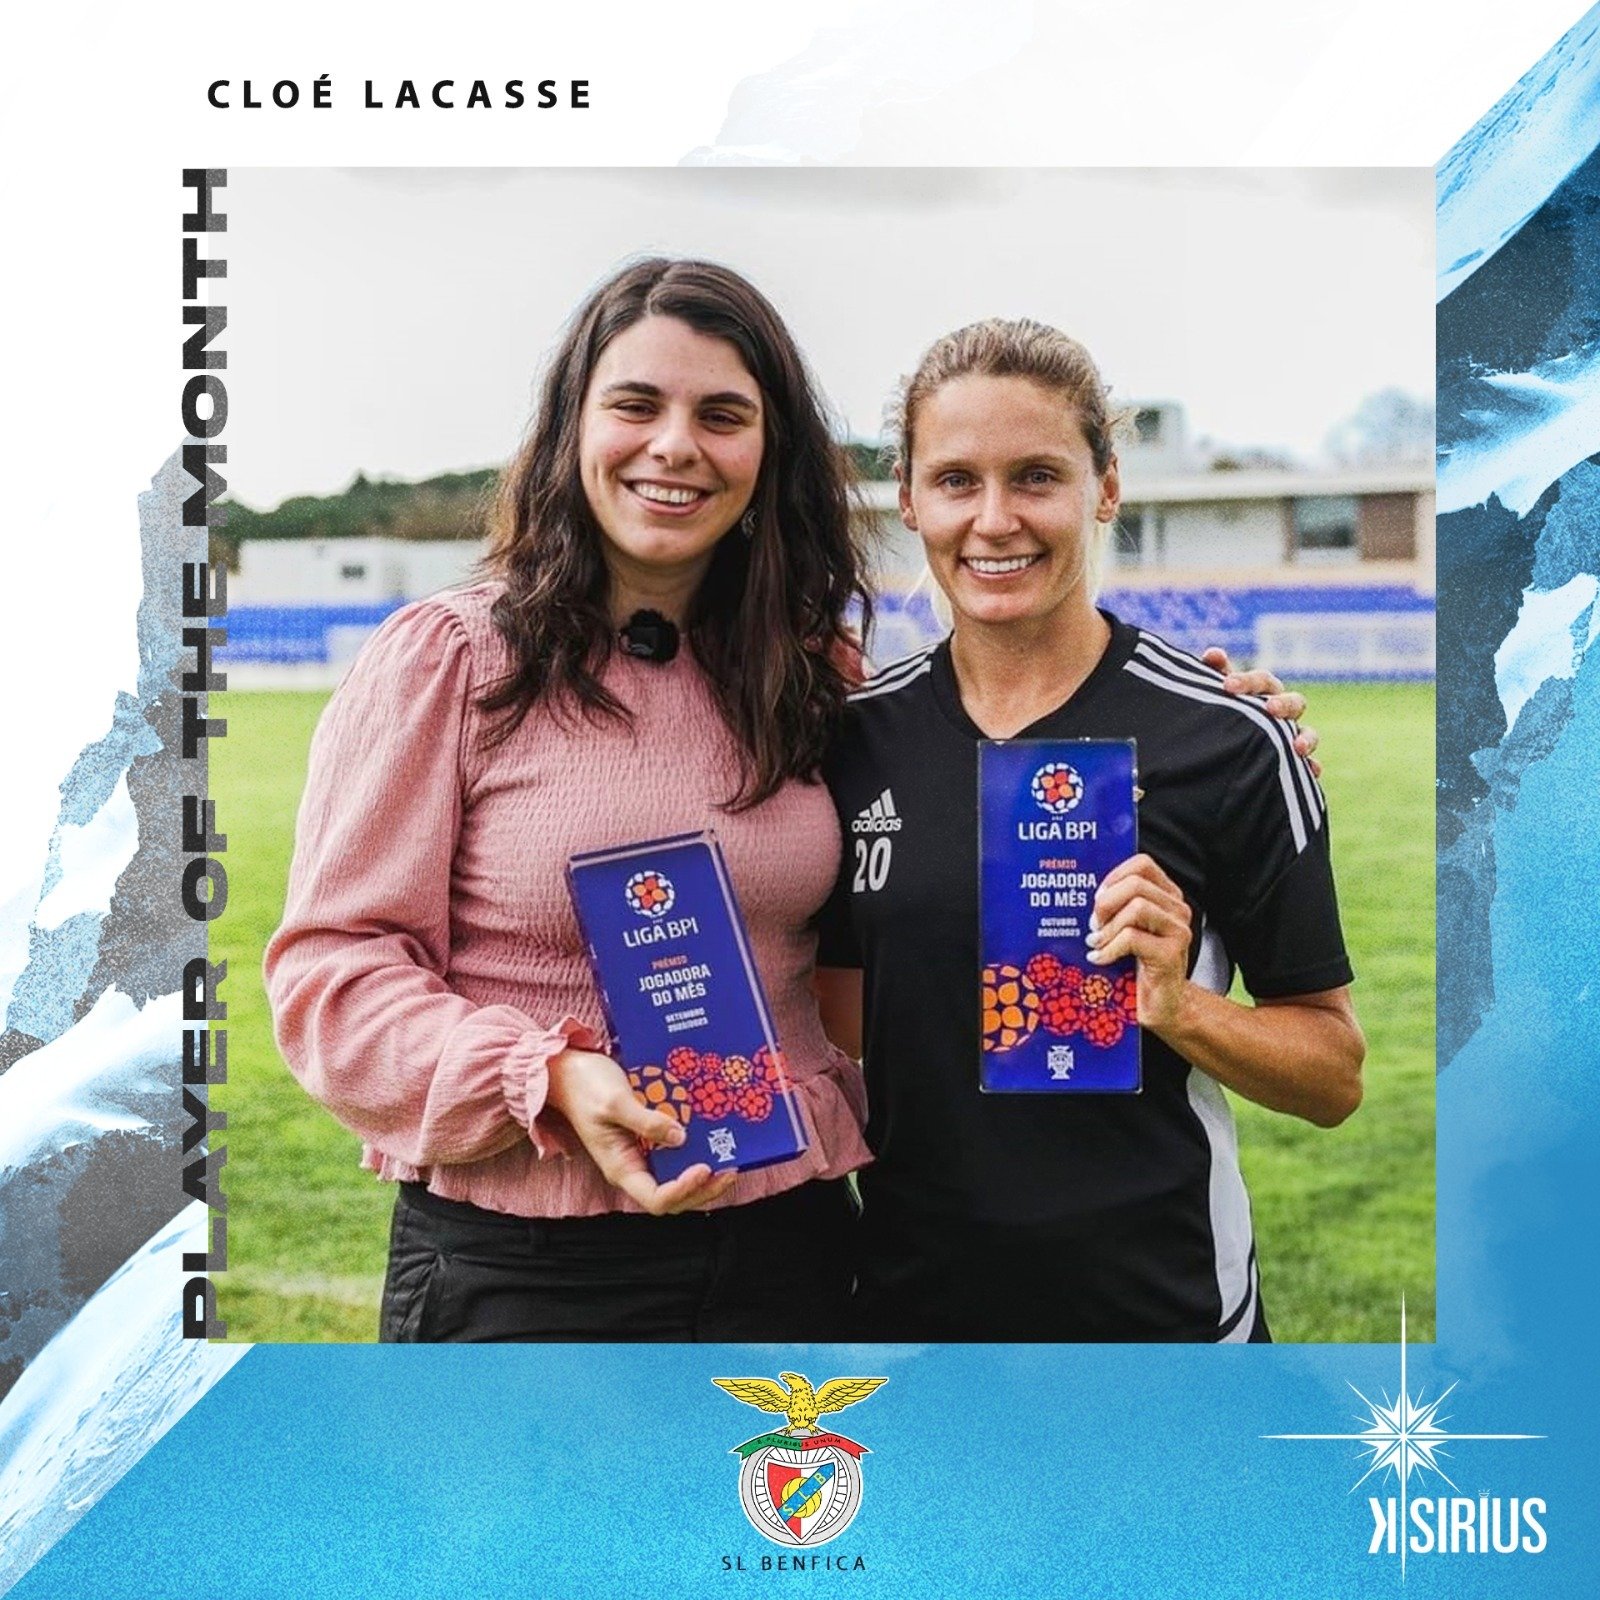 Player of the Month: Cloé Lacasse (SL Benfica)